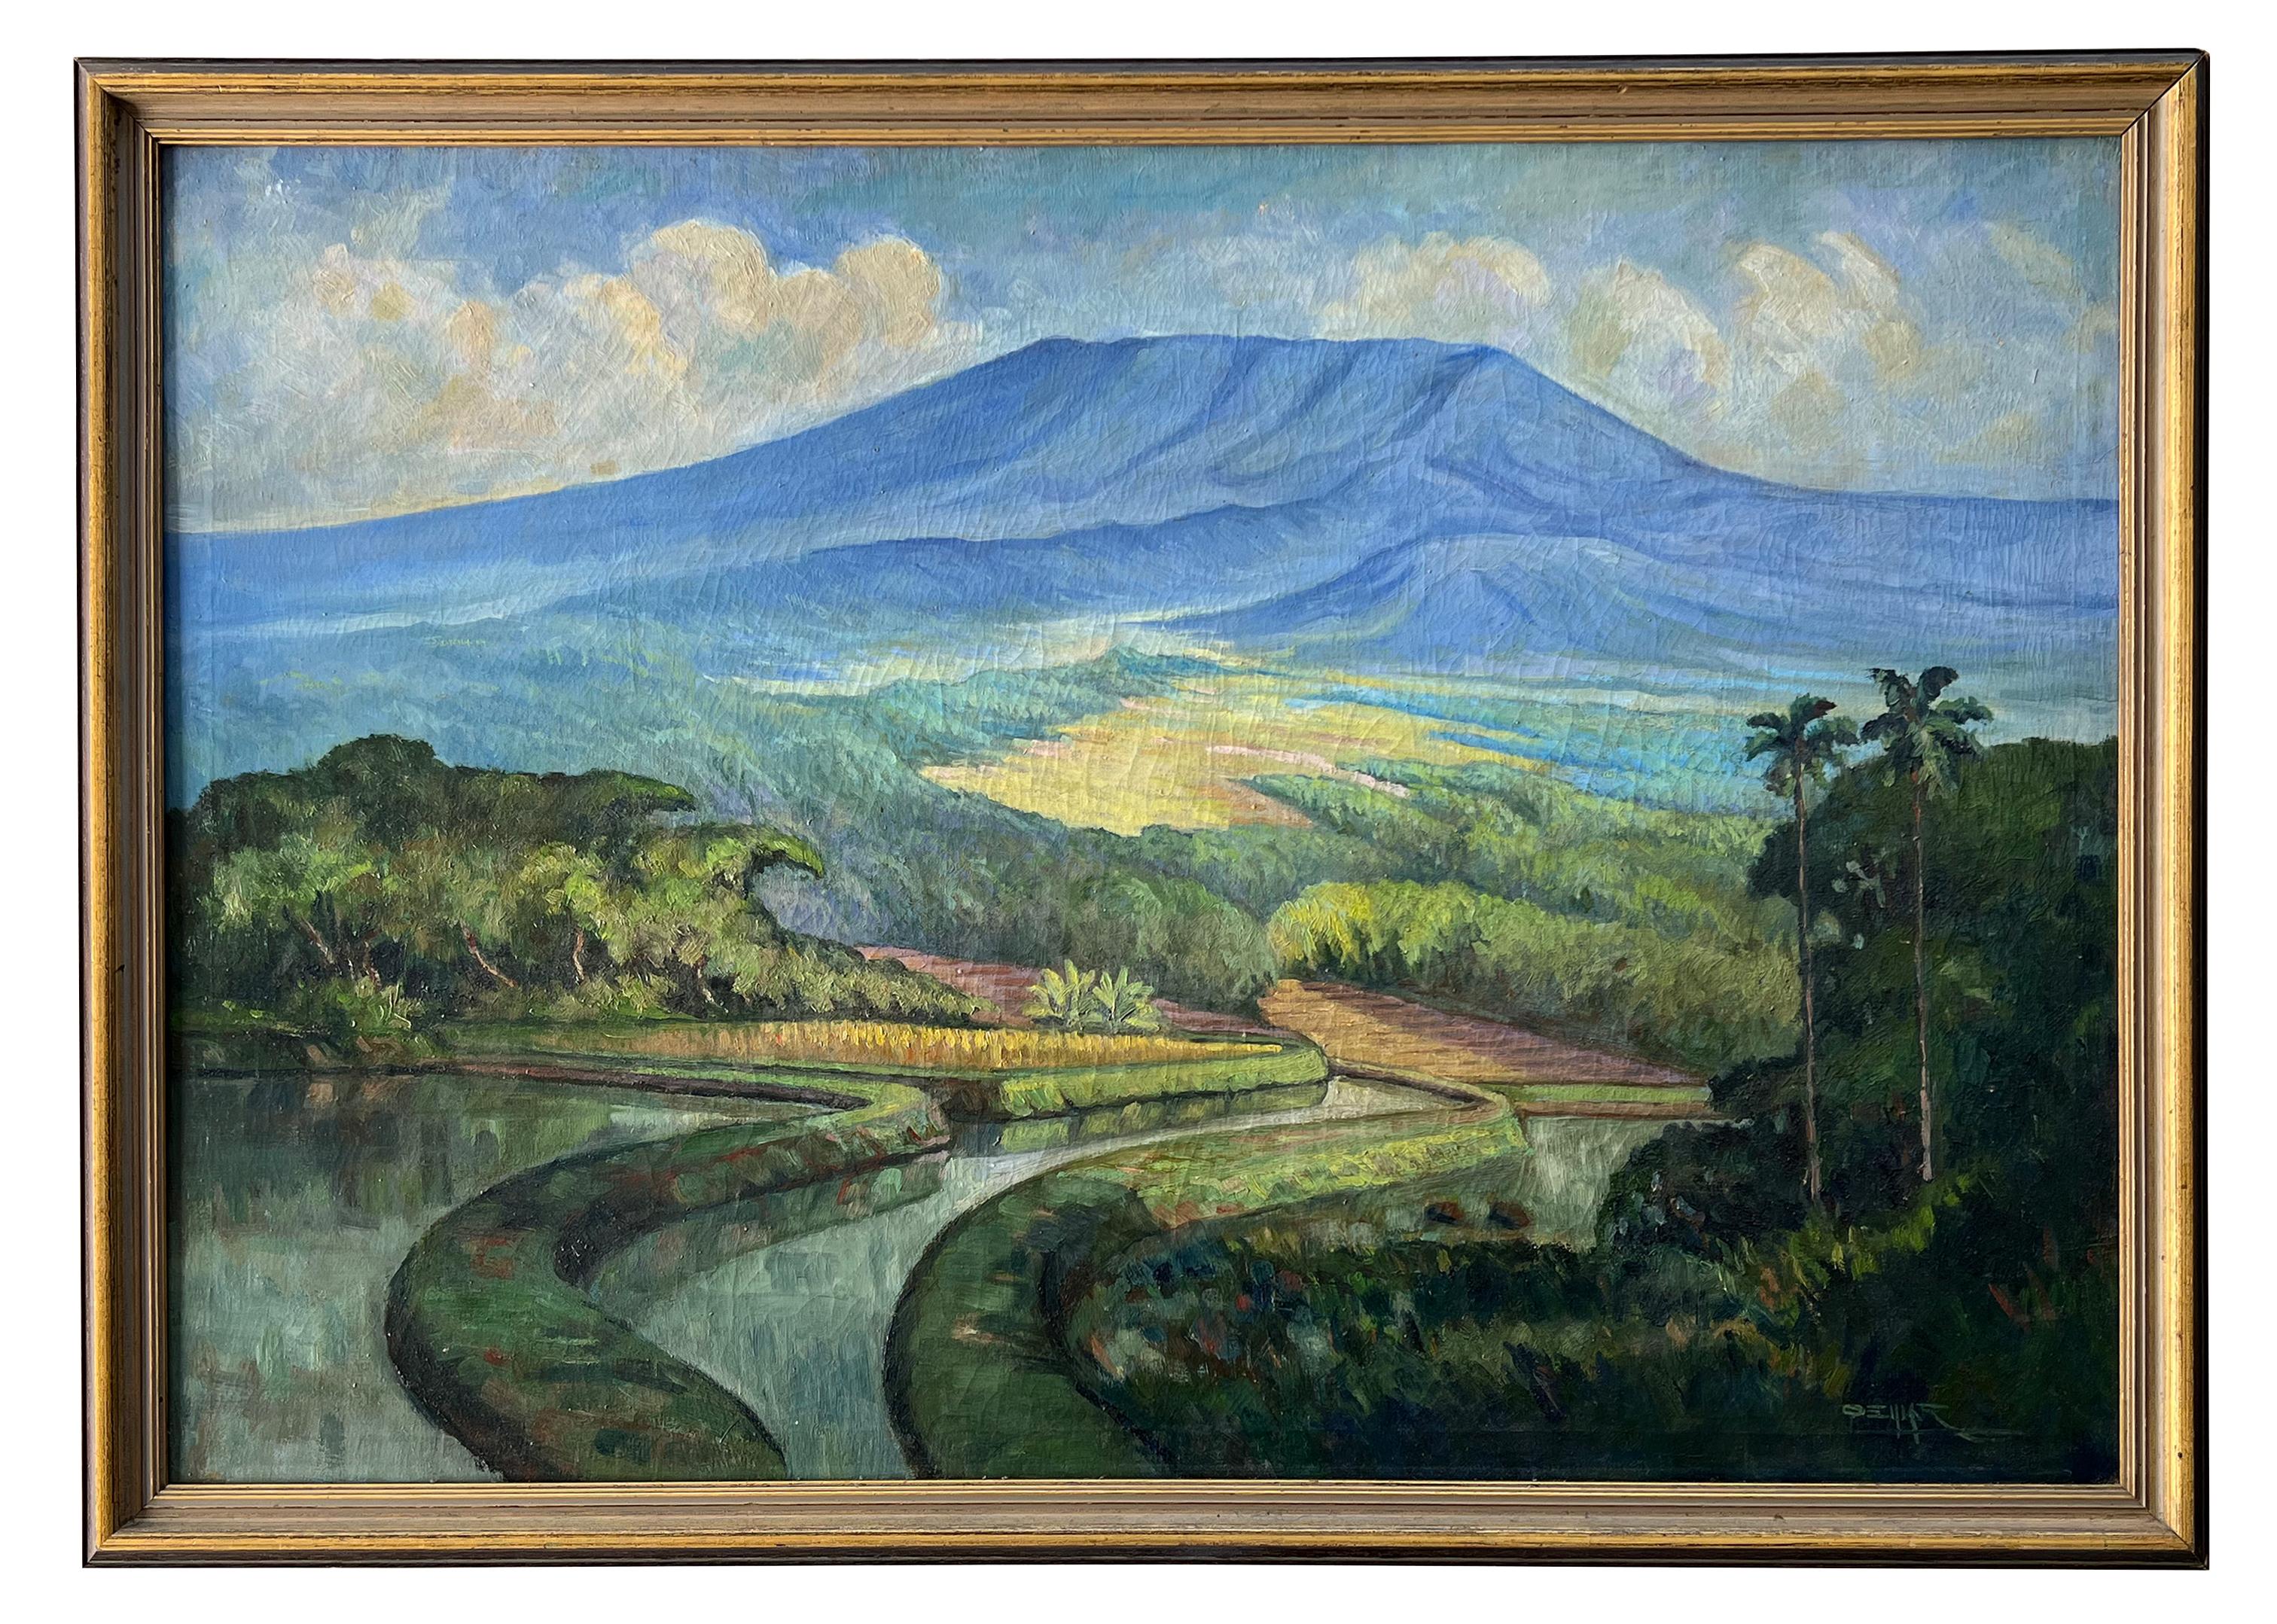 This atmospheric oil painting on canvas depicts rice fields on Bali with Mount Batur in the distance. Signed DEWAR in the lower right  and presented in the original gilded frame. This painting was created by a local artist on Bali for the tourist